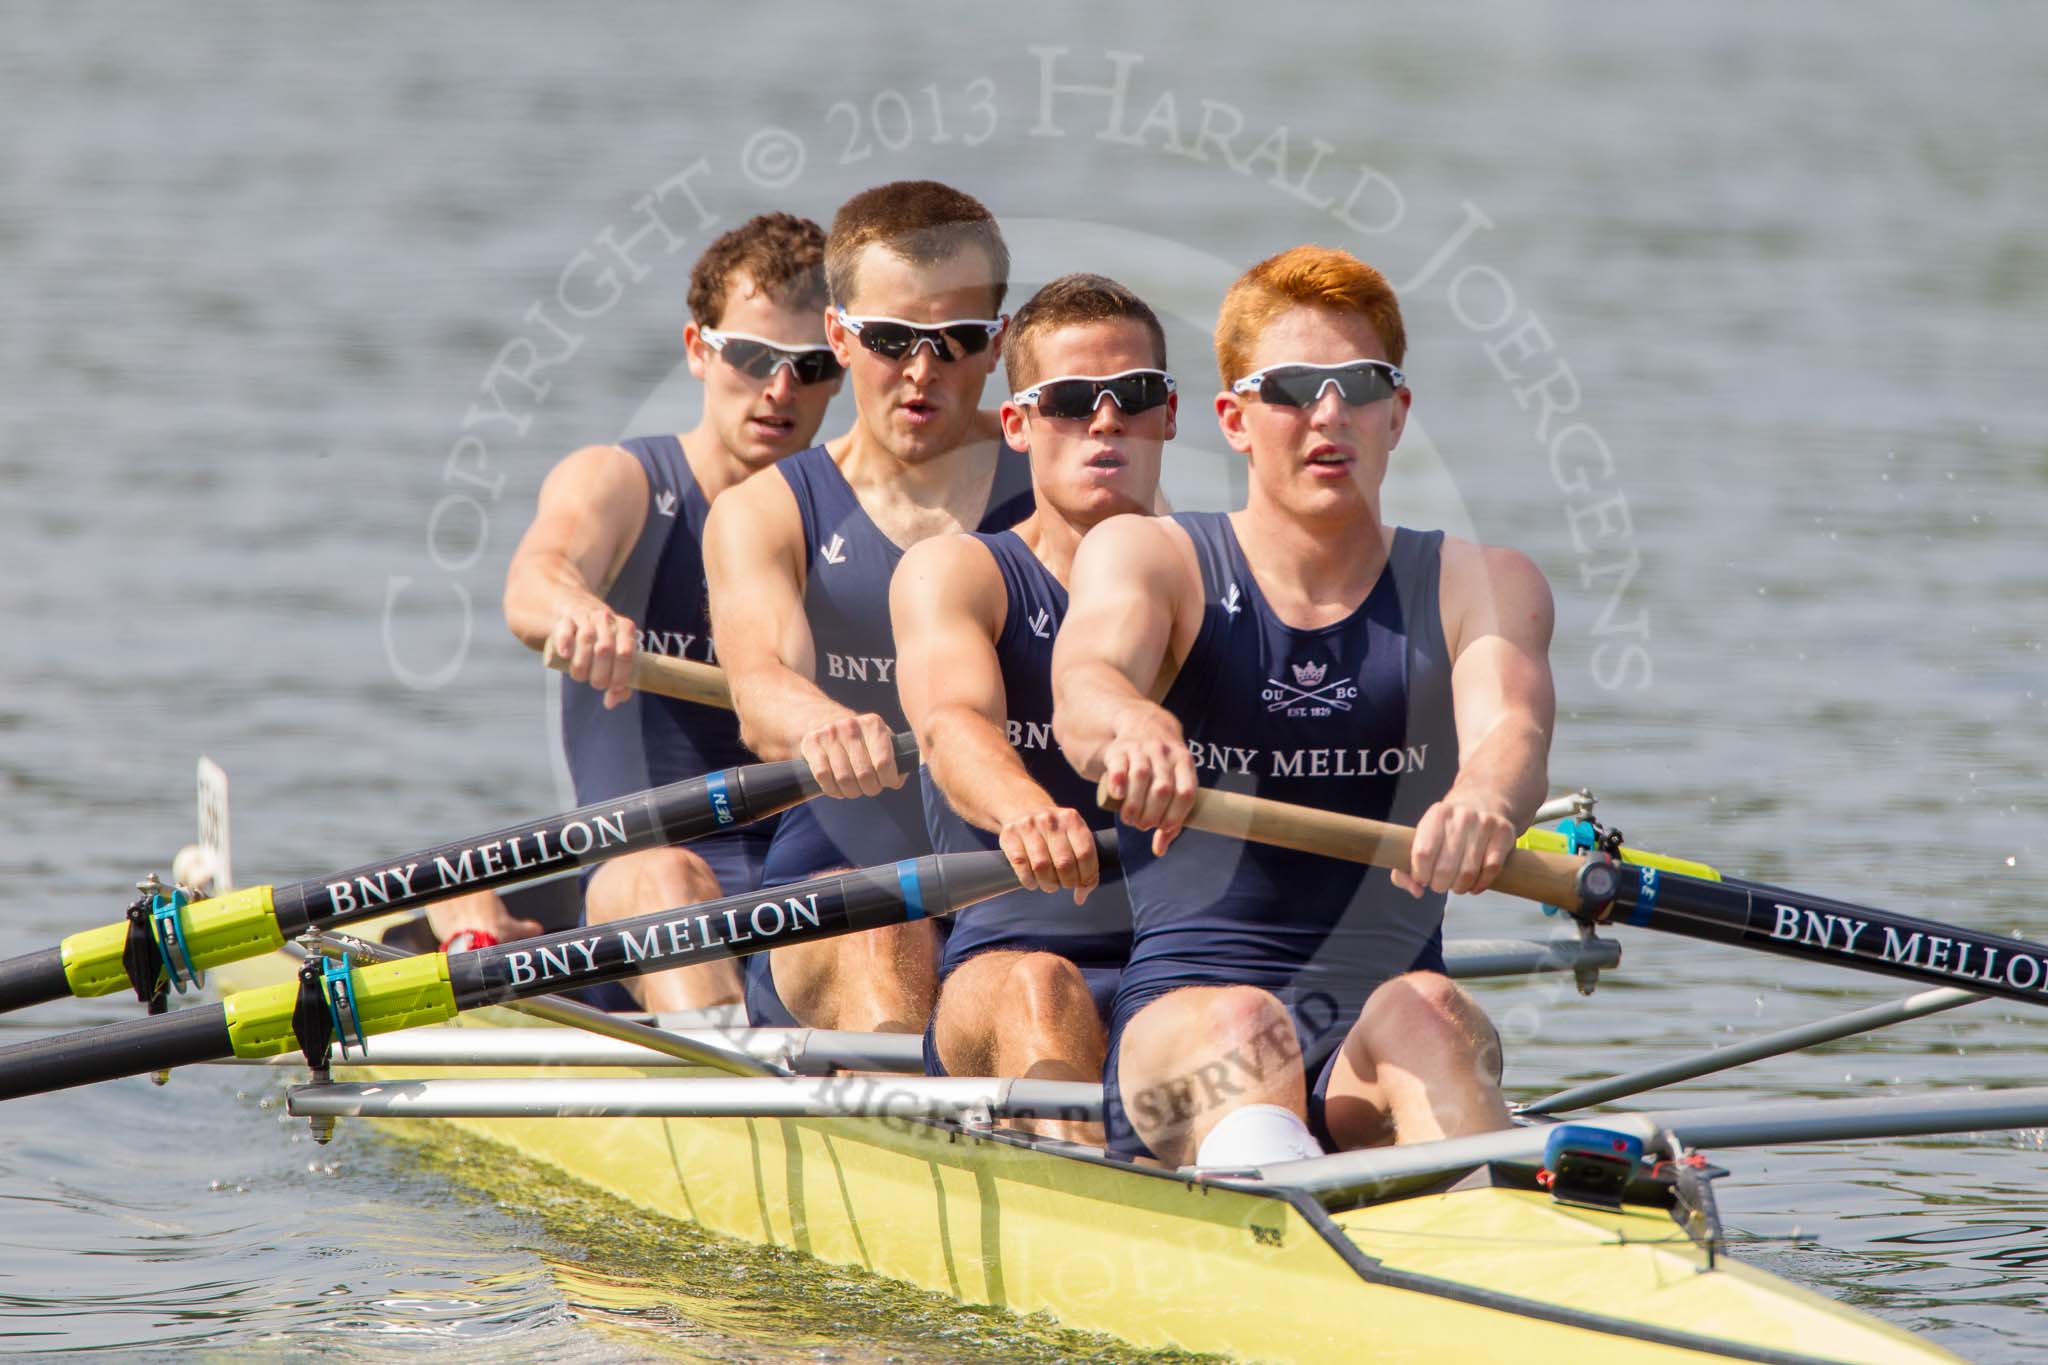 Henley Royal Regatta 2013, Saturday: Race No. 3 for the Prince Albert Challenge Cup, Delftsche Studenten Roeivereeniging Laga, Holland v Isis Boat Club (here A. C. Mandale, J. E. Mountain, T. S. Watson, and J. E. Dawson). Image #117, 06 July 2013 10:22 River Thames, Henley on Thames, UK